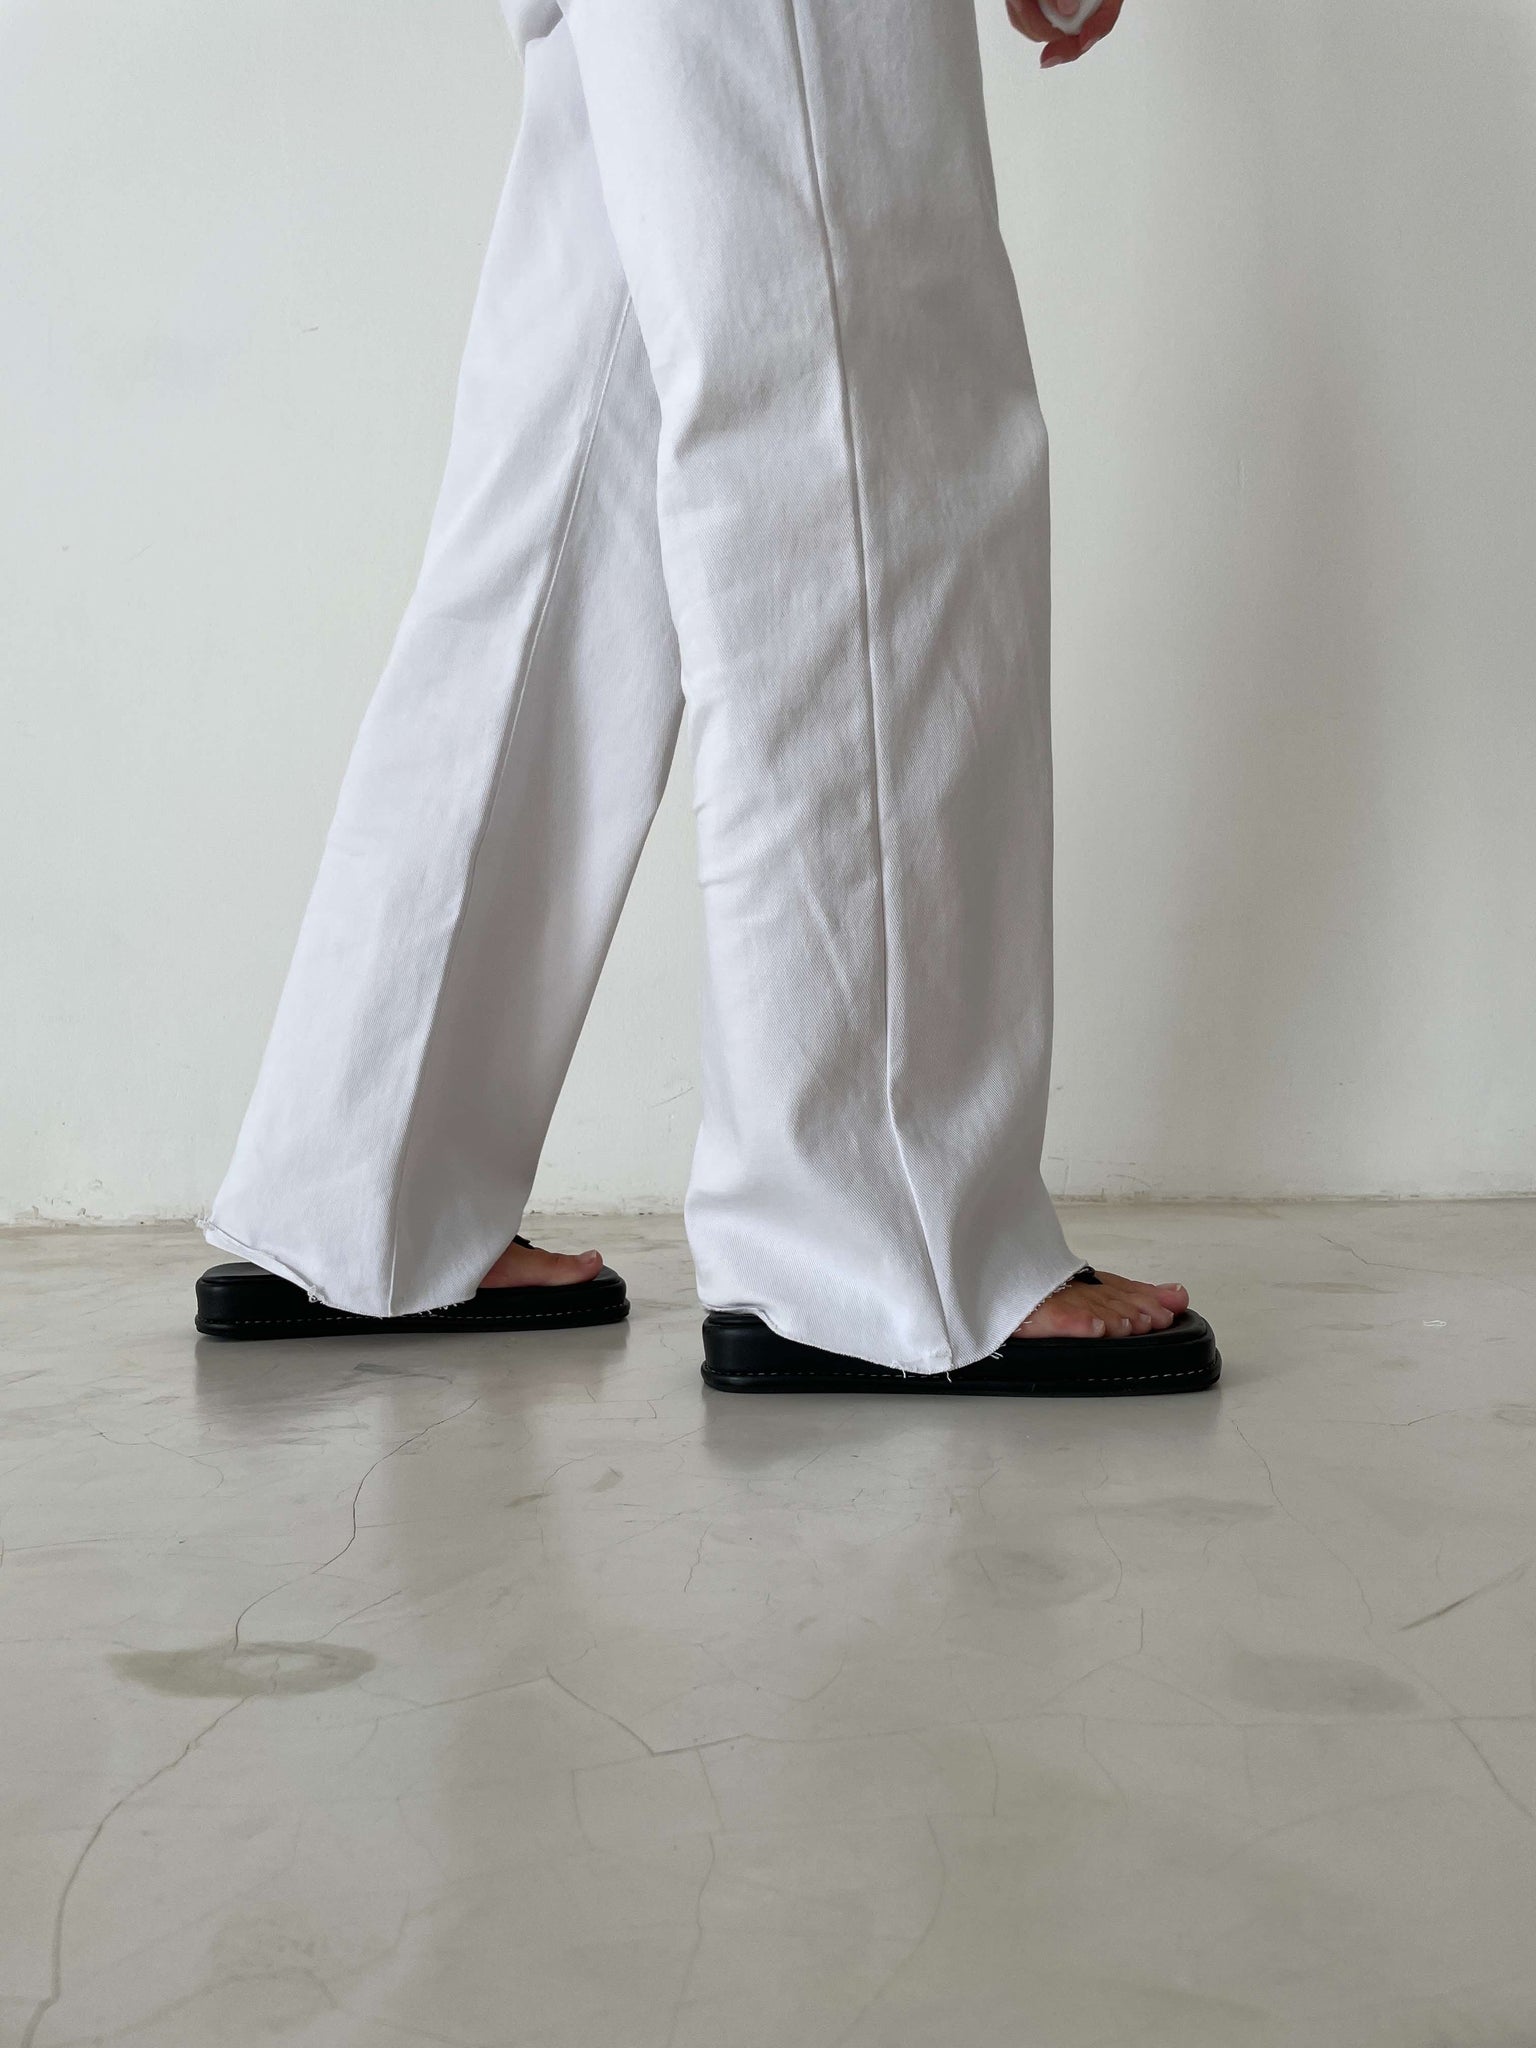 STOCK IN CANADA-RELAX PLEATED JEANS in WHITE